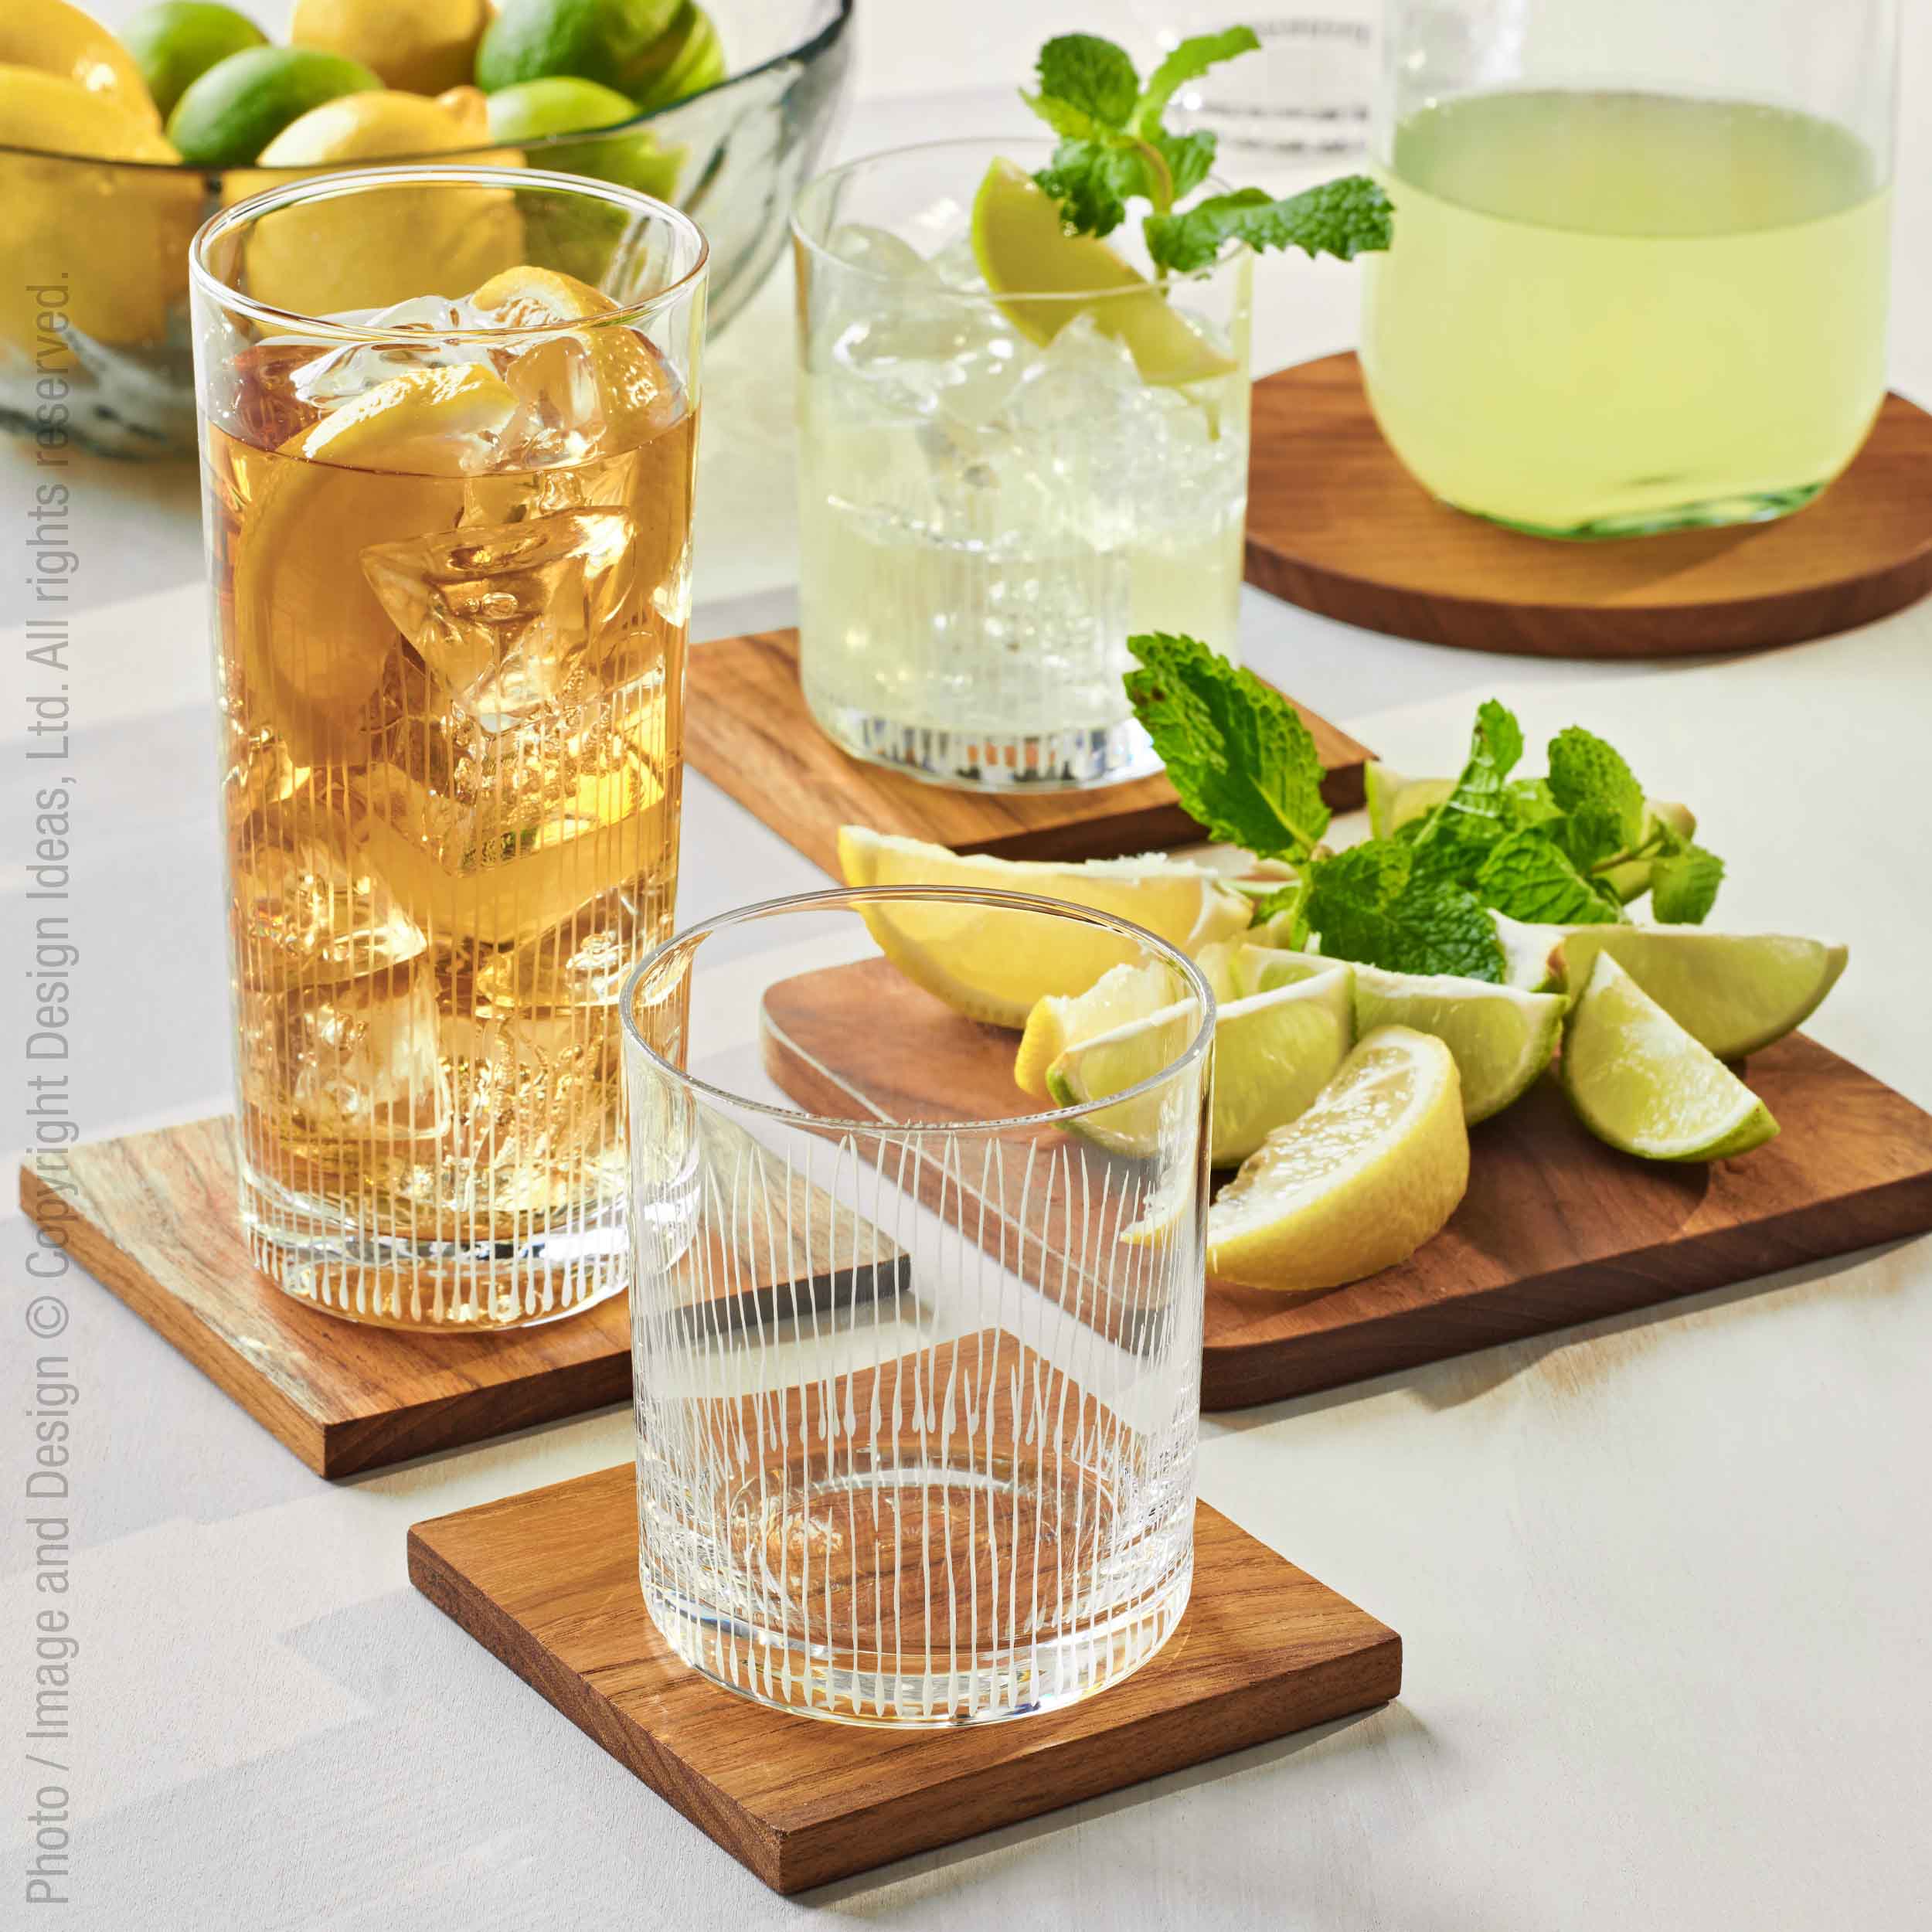 Drinking Glass Set 16 Pcs, Include Eight 16 Oz & Eight 9.8 Oz Glasses